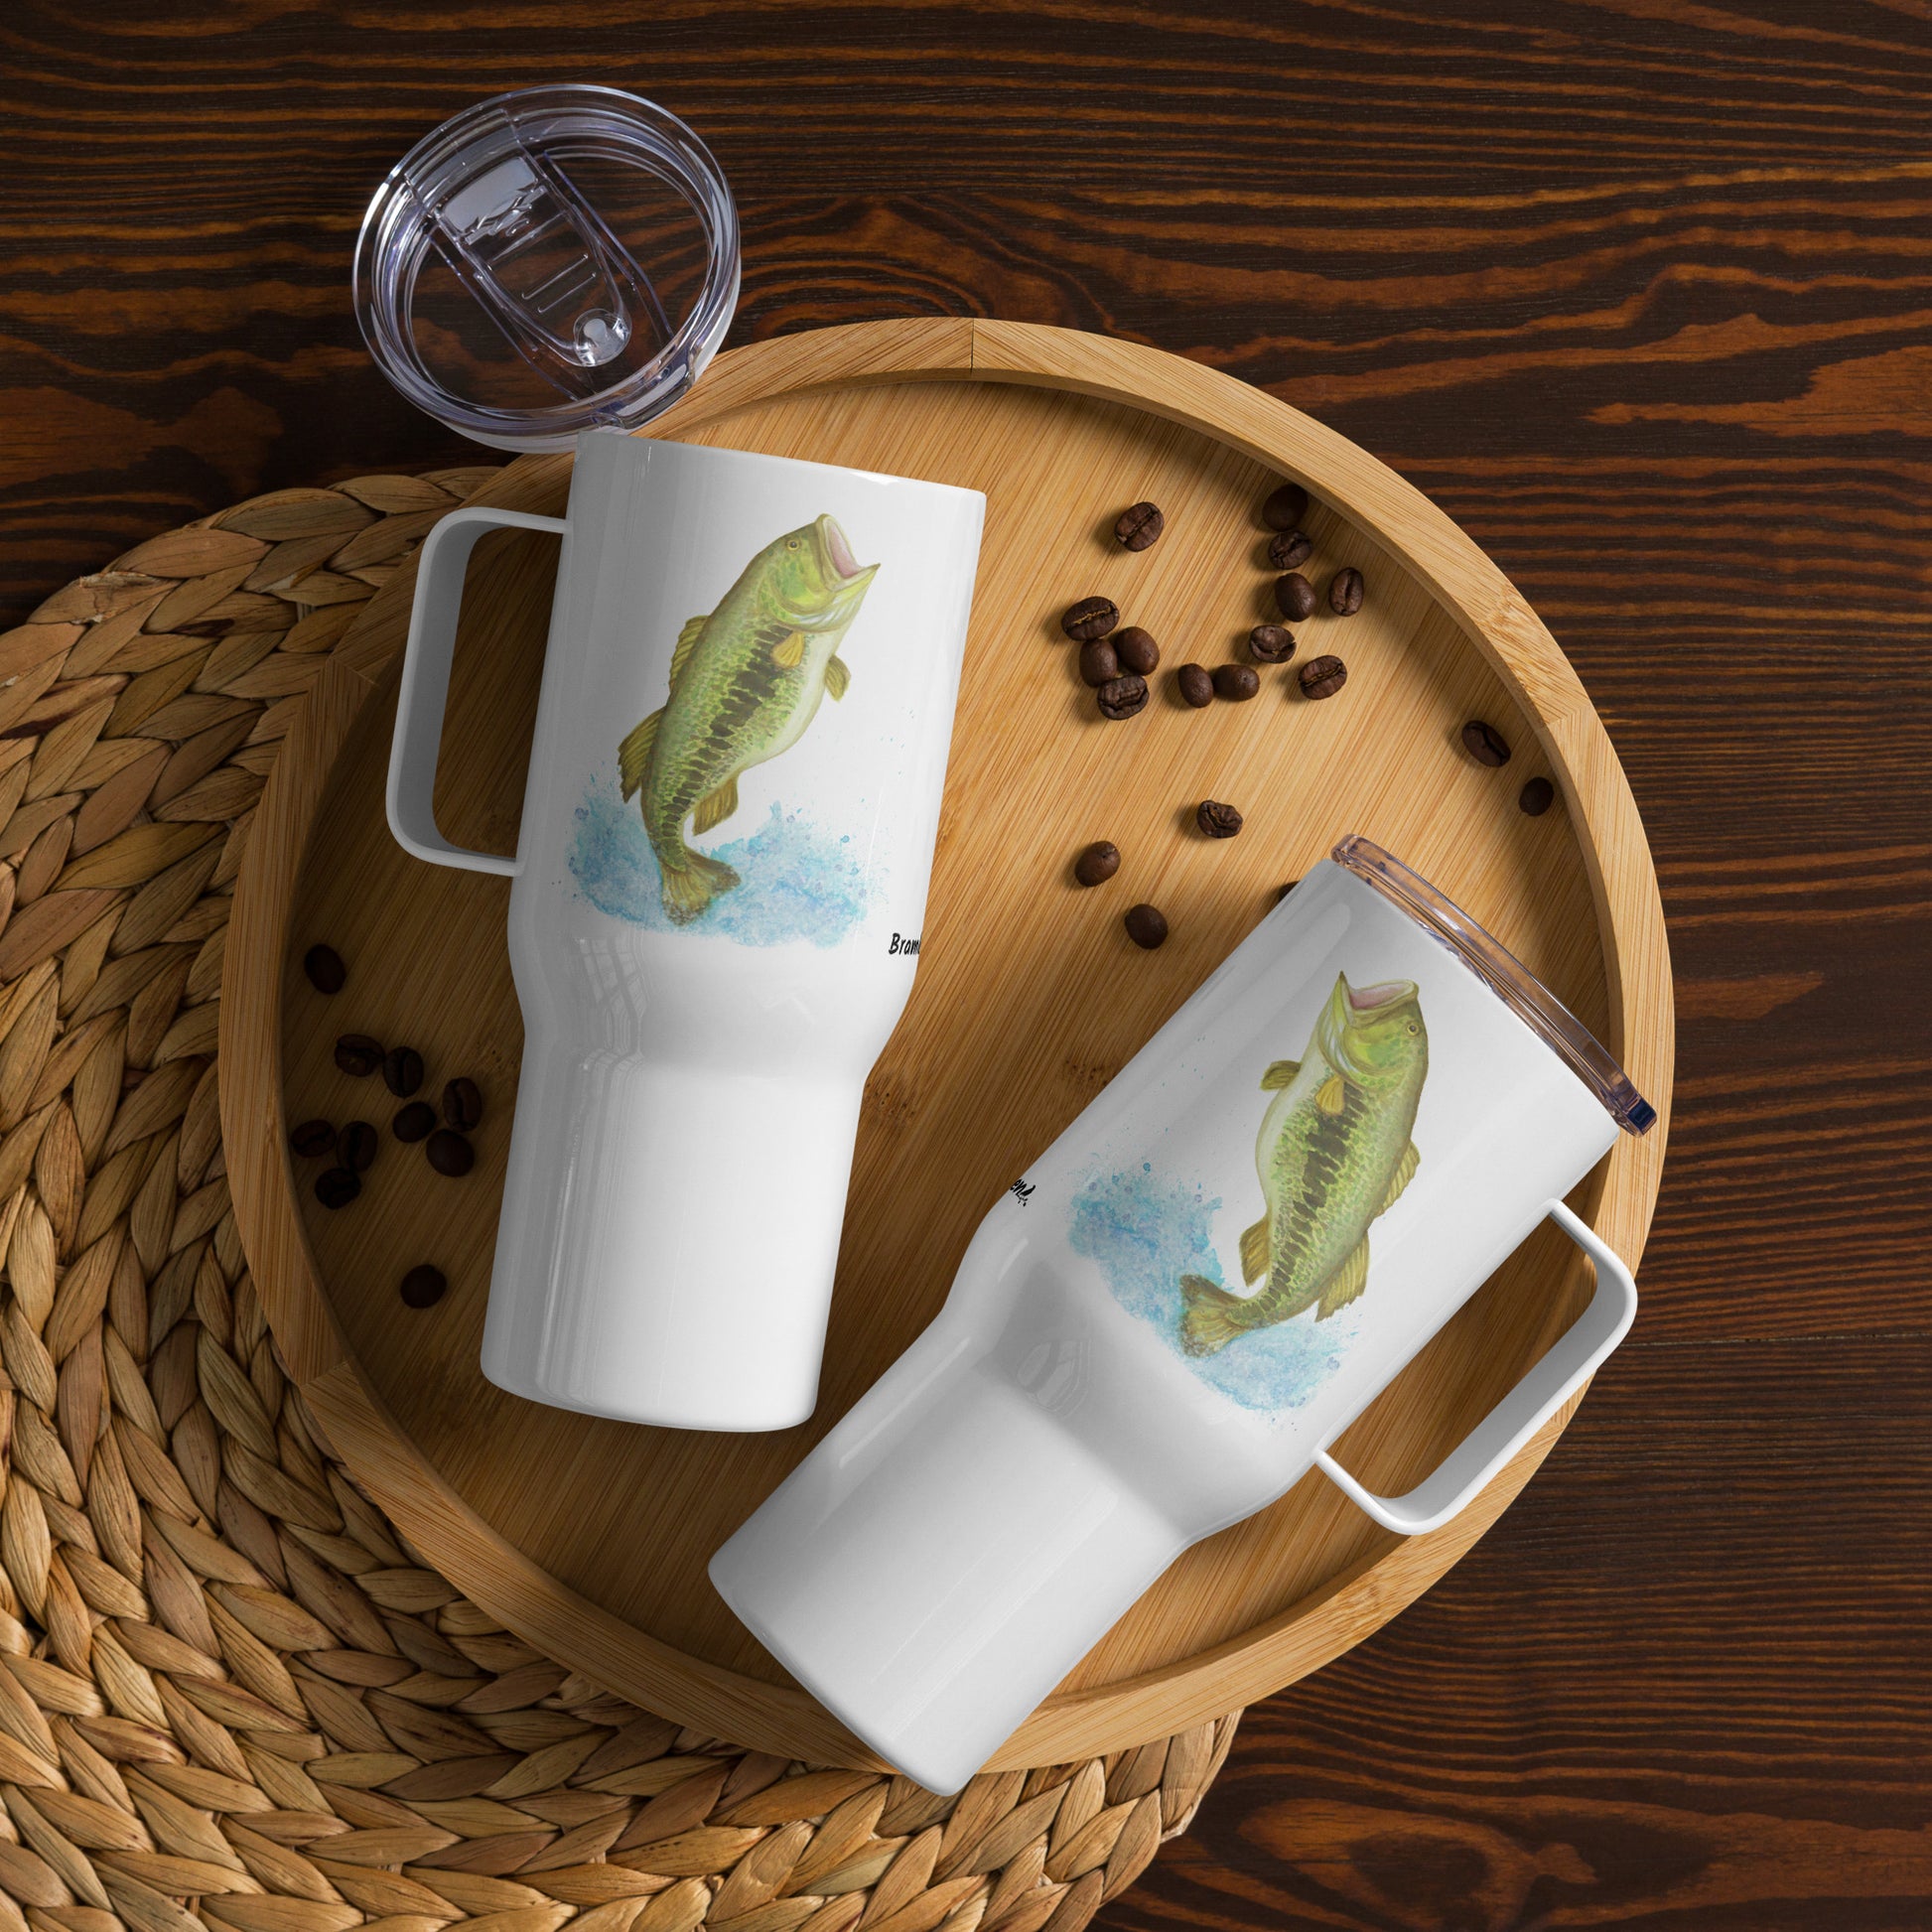 Stainless steel travel mug with handle. Holds 25 ounces of hot or cold drinks. Has print of watercolor bass fish on both sides. Fits most car cup holders. Comes with spill-proof BPA-free plastic lid. Two mugs shown on wooden tray by coffee beans.